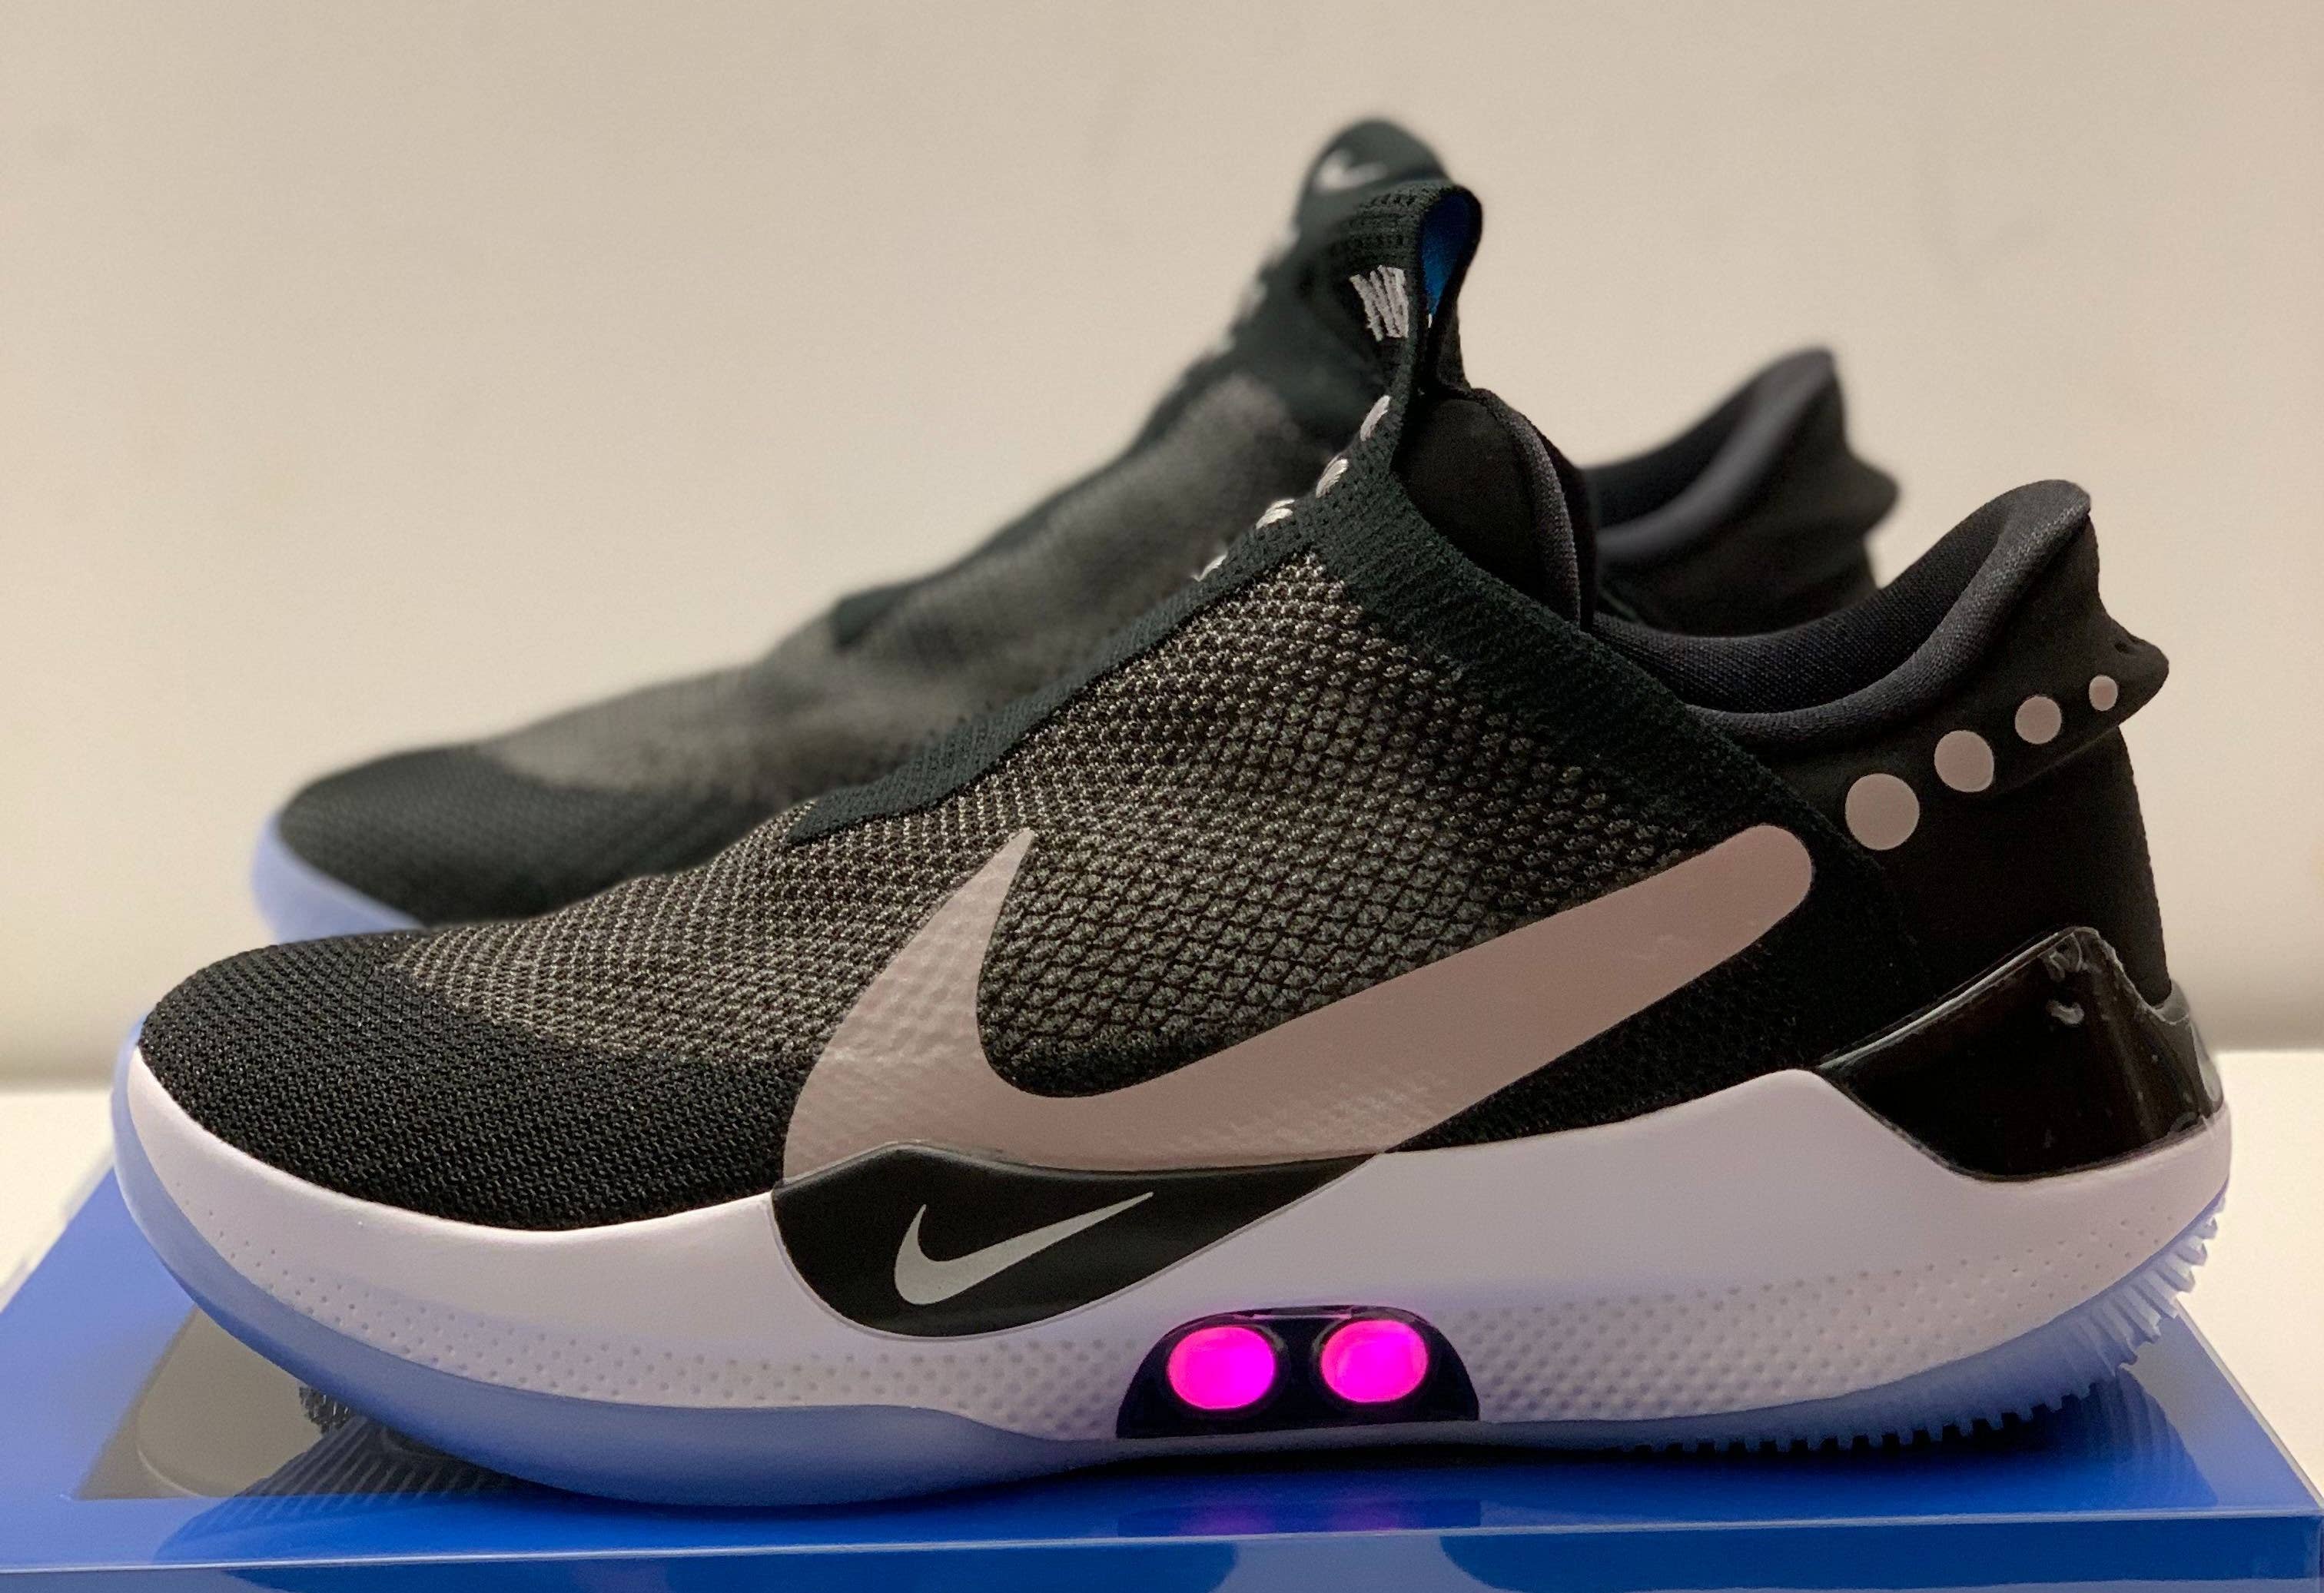 Nike's new Adapt BB sneakers to be worn by NBA player Jayson Tatum